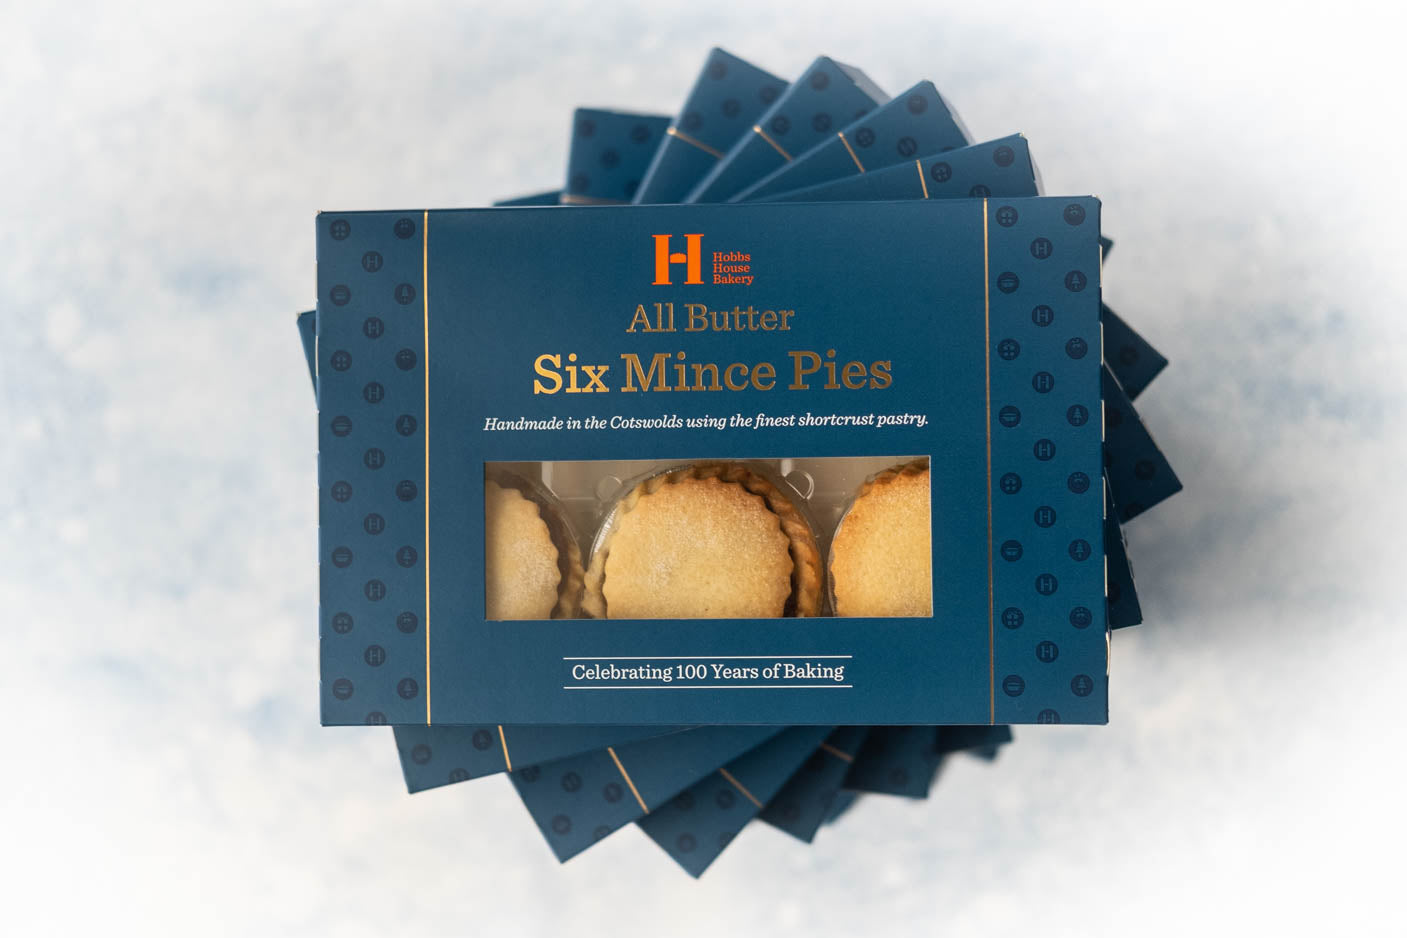 All Butter Mince Pies x6